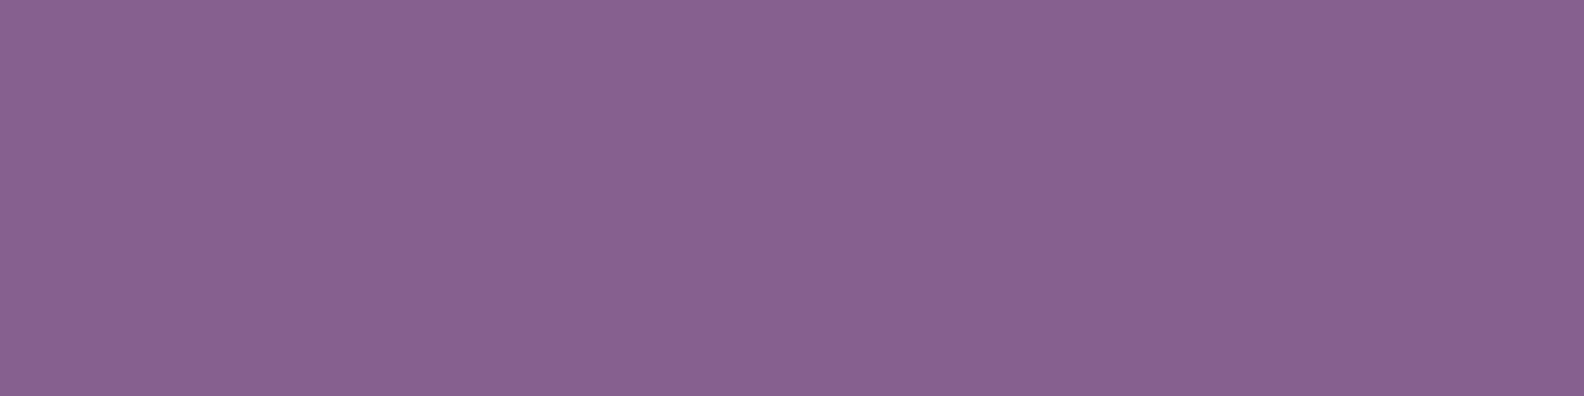 1584x396 French Lilac Solid Color Background